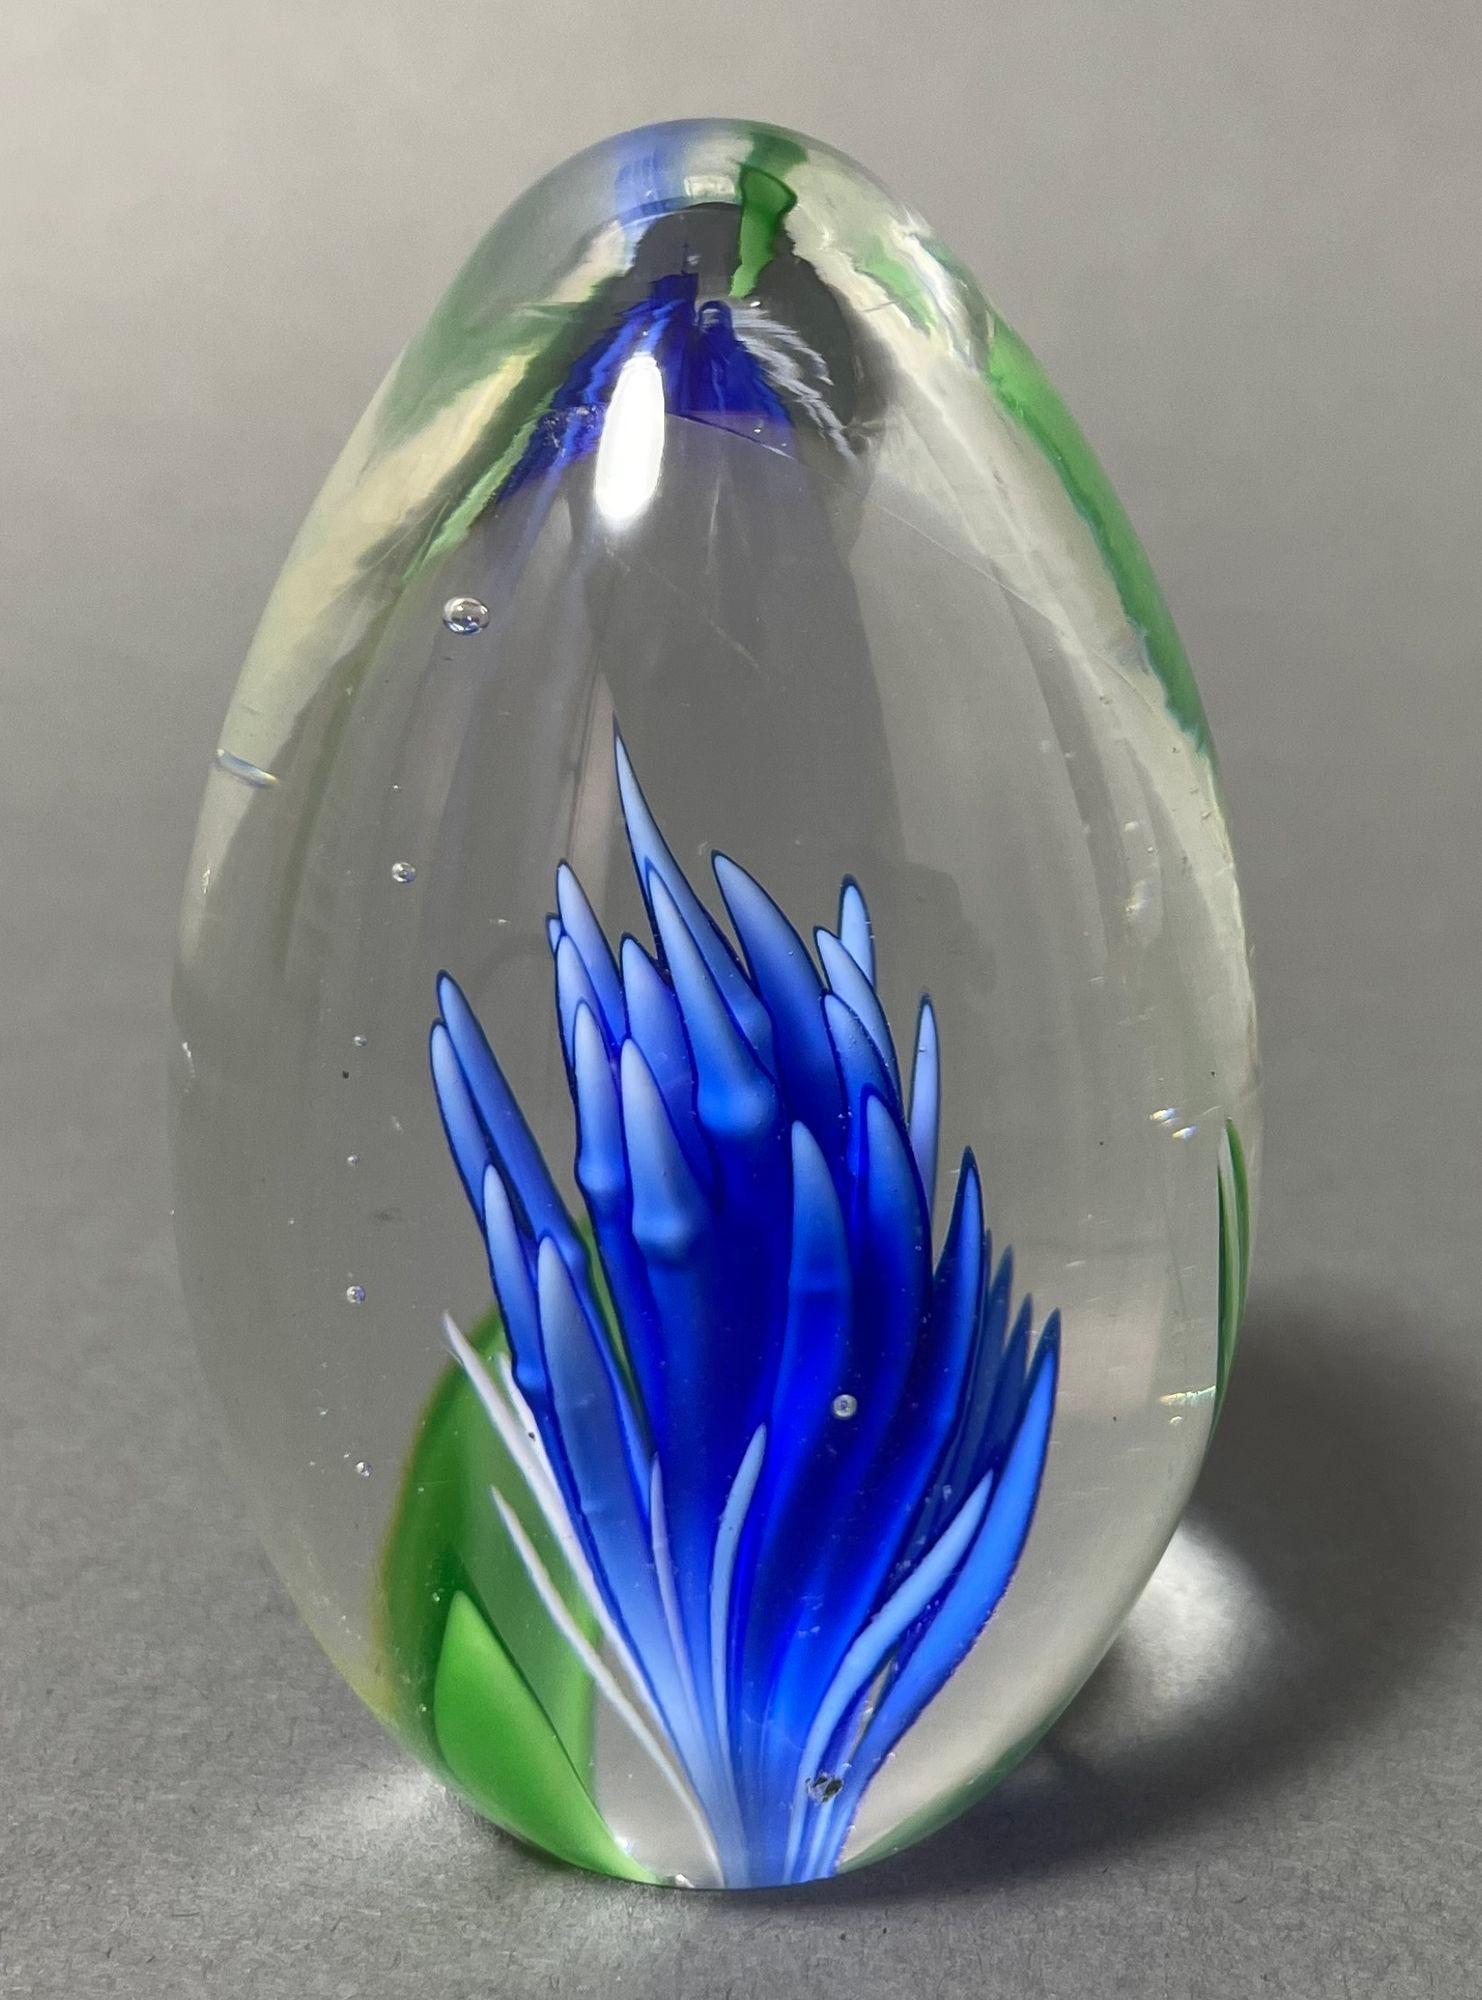 Vintage Italian blown art glass paperweight in vibrant blue and green in a transparent egg shape.
Vintage Italian Murano Hand blown art glass egg shaped paperweight, with encased bright blue glowing underwater plant with green oceanic leaves in